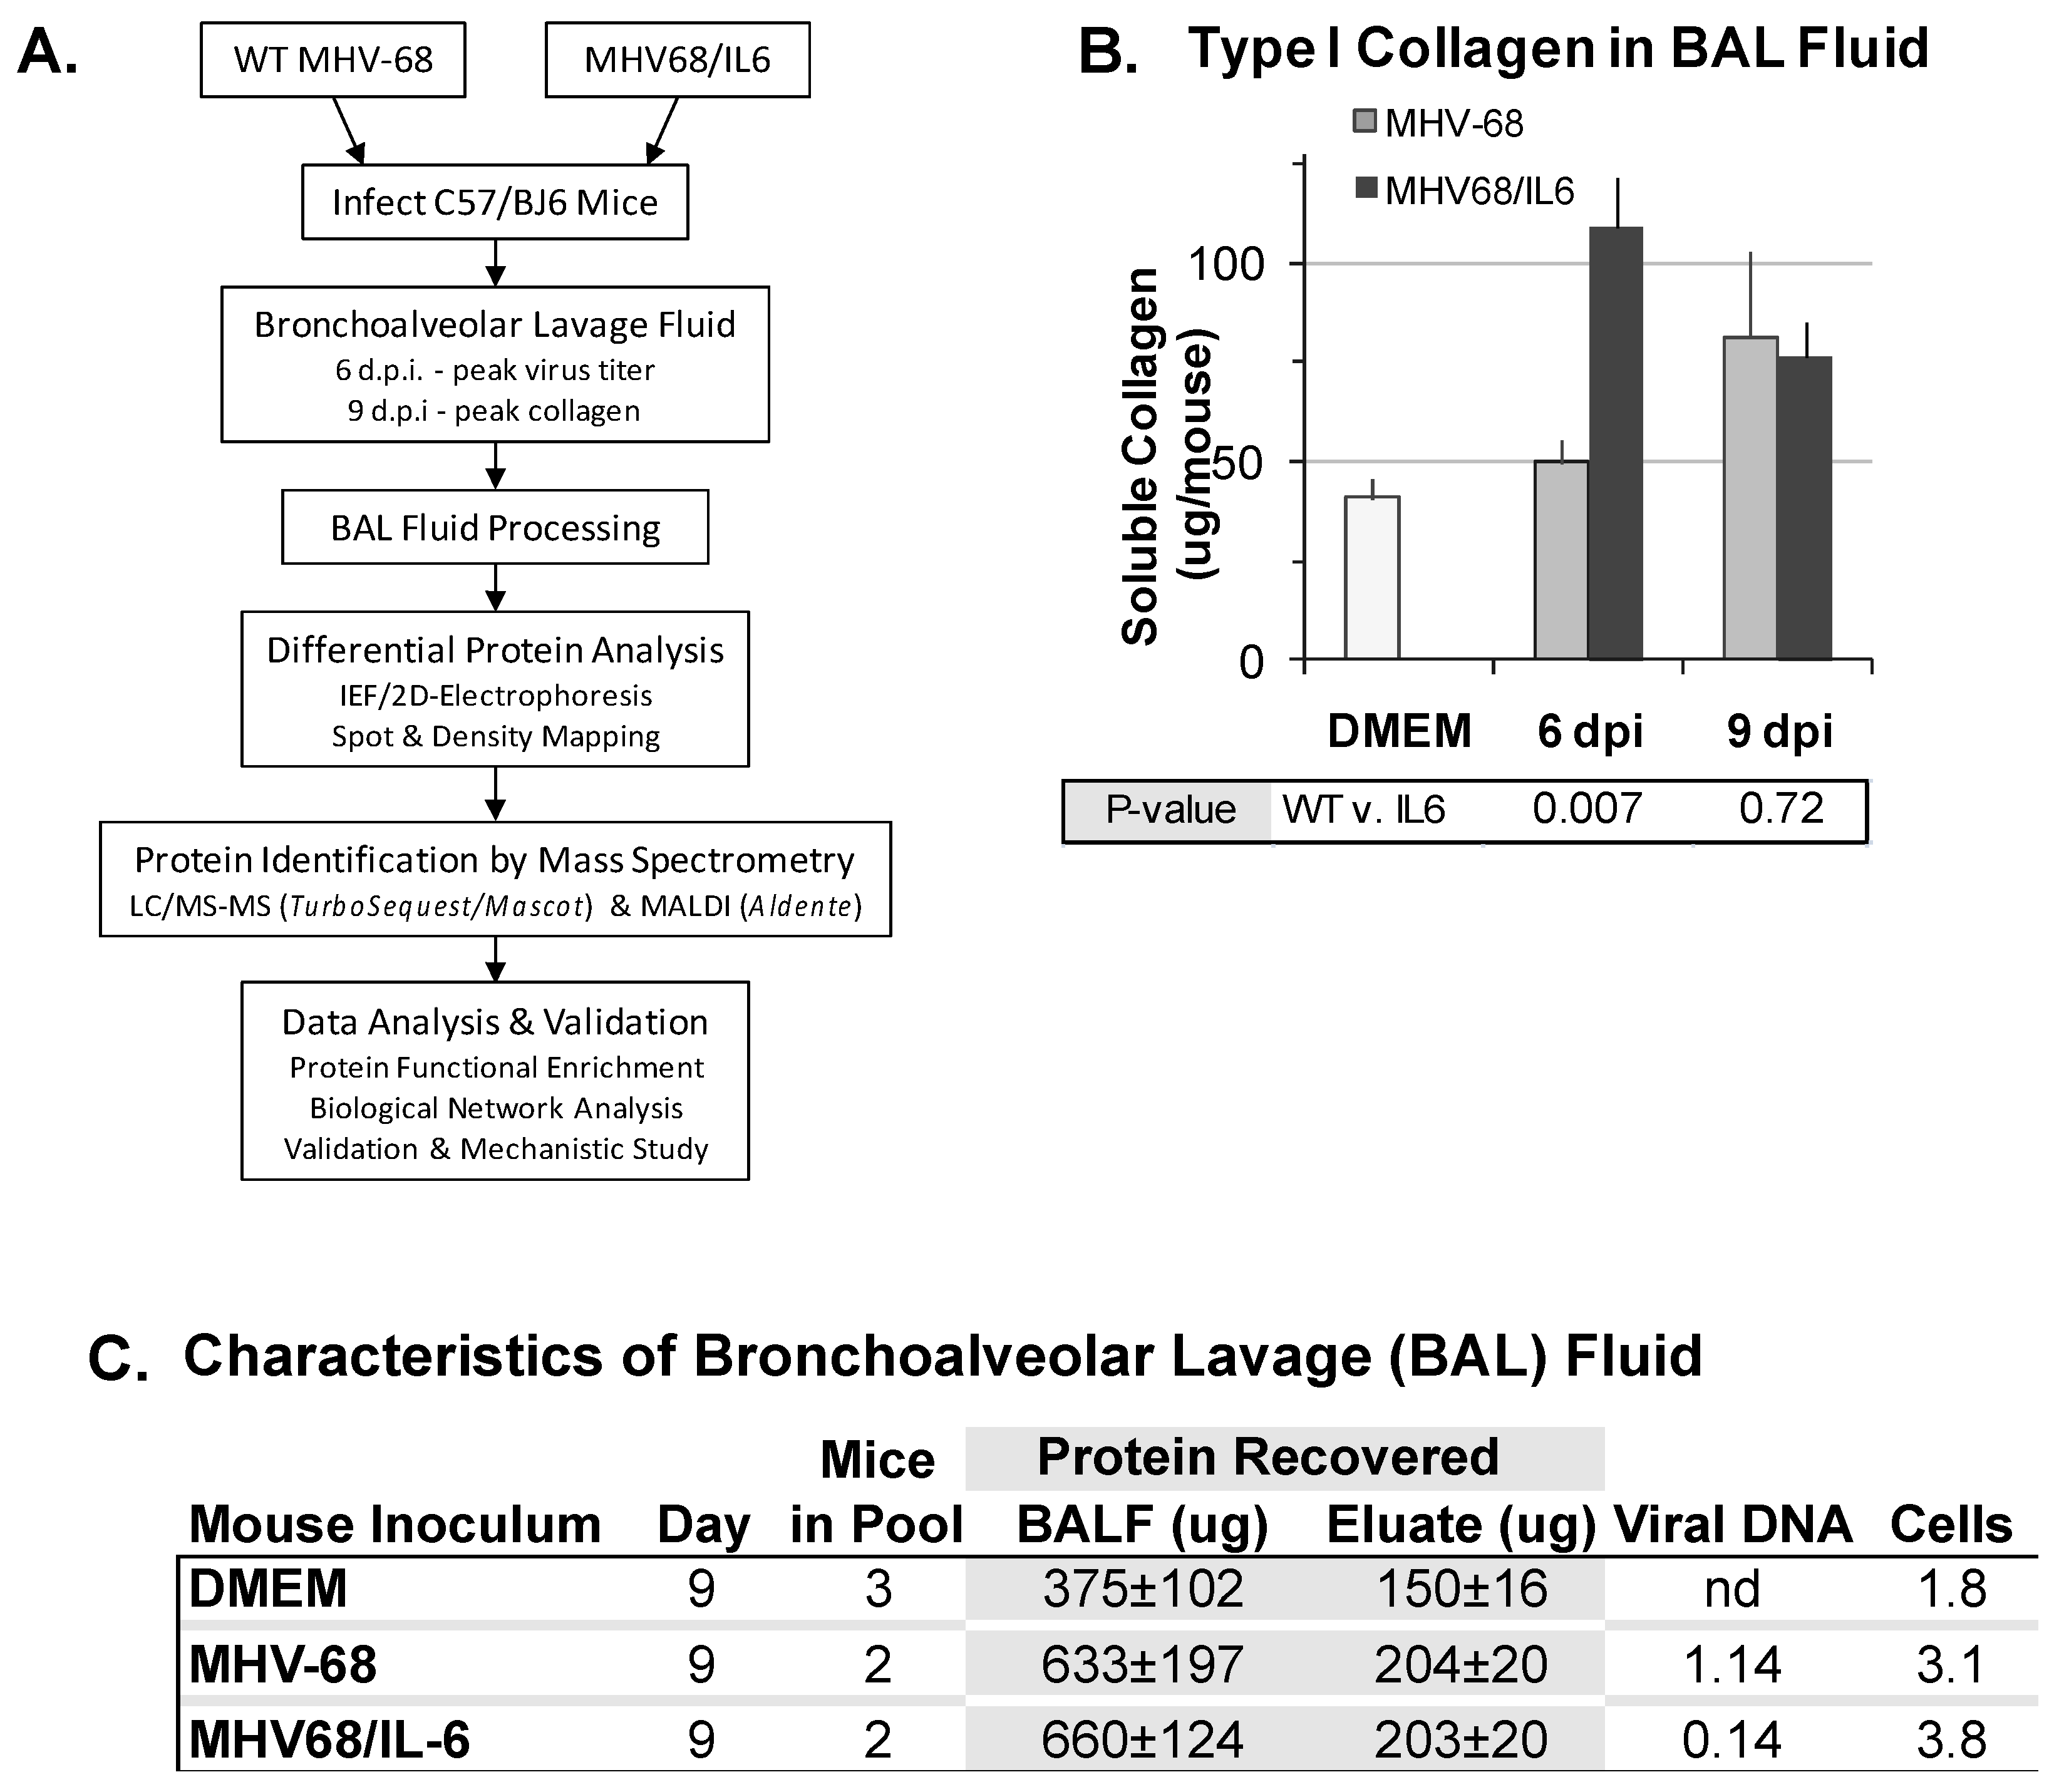 Viruses | Free Full-Text | Proteomics of Bronchoalveolar Lavage Fluid  Reveals a Lung Oxidative Stress Response in Murine Herpesvirus-68 Infection  | HTML